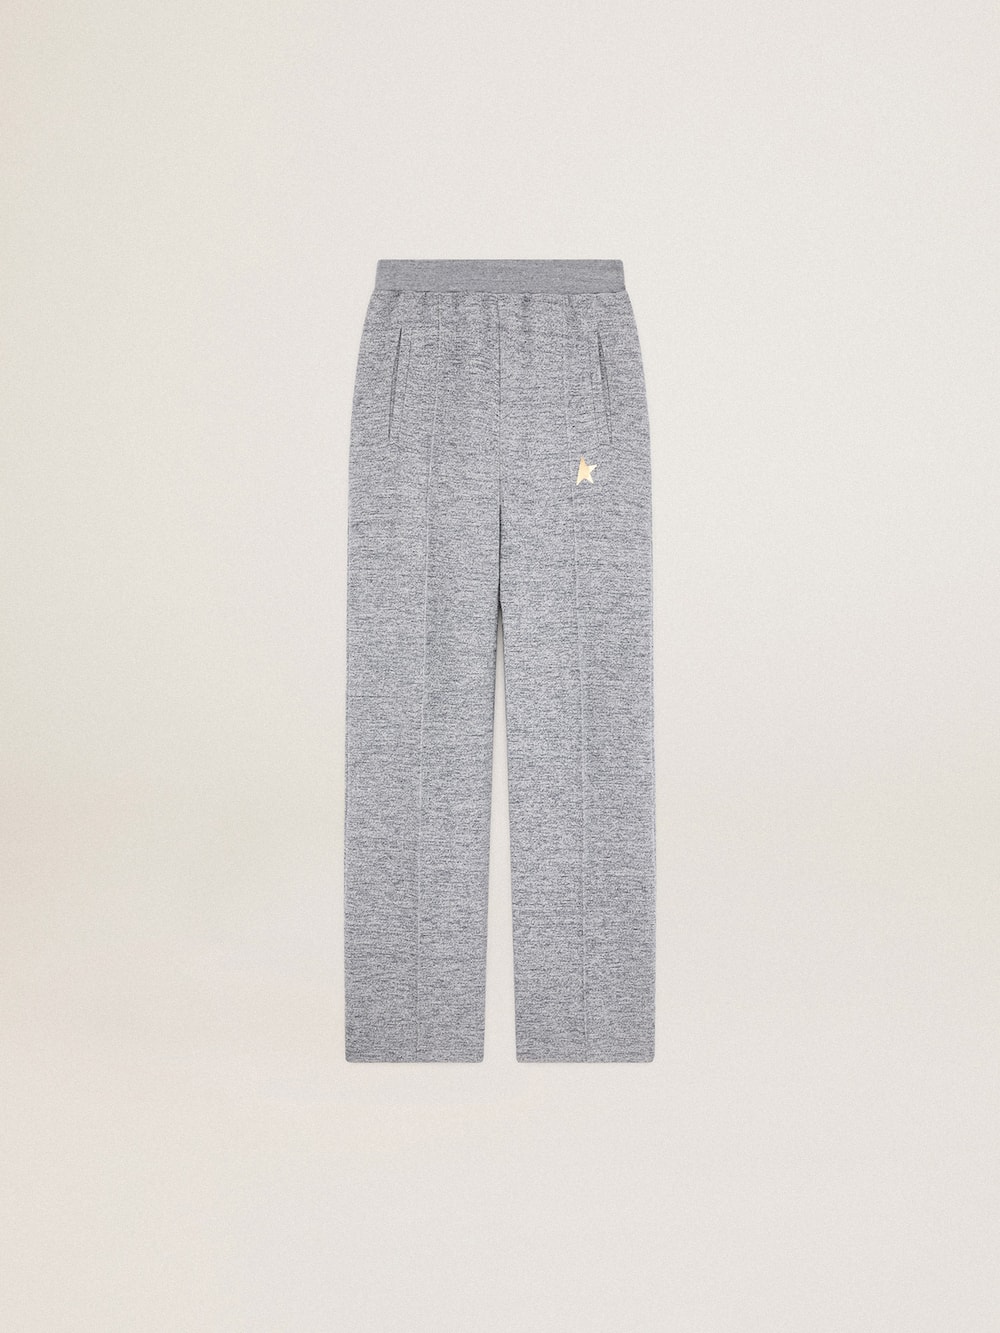 Golden Goose - Women's gray joggers with gold star on the front in 